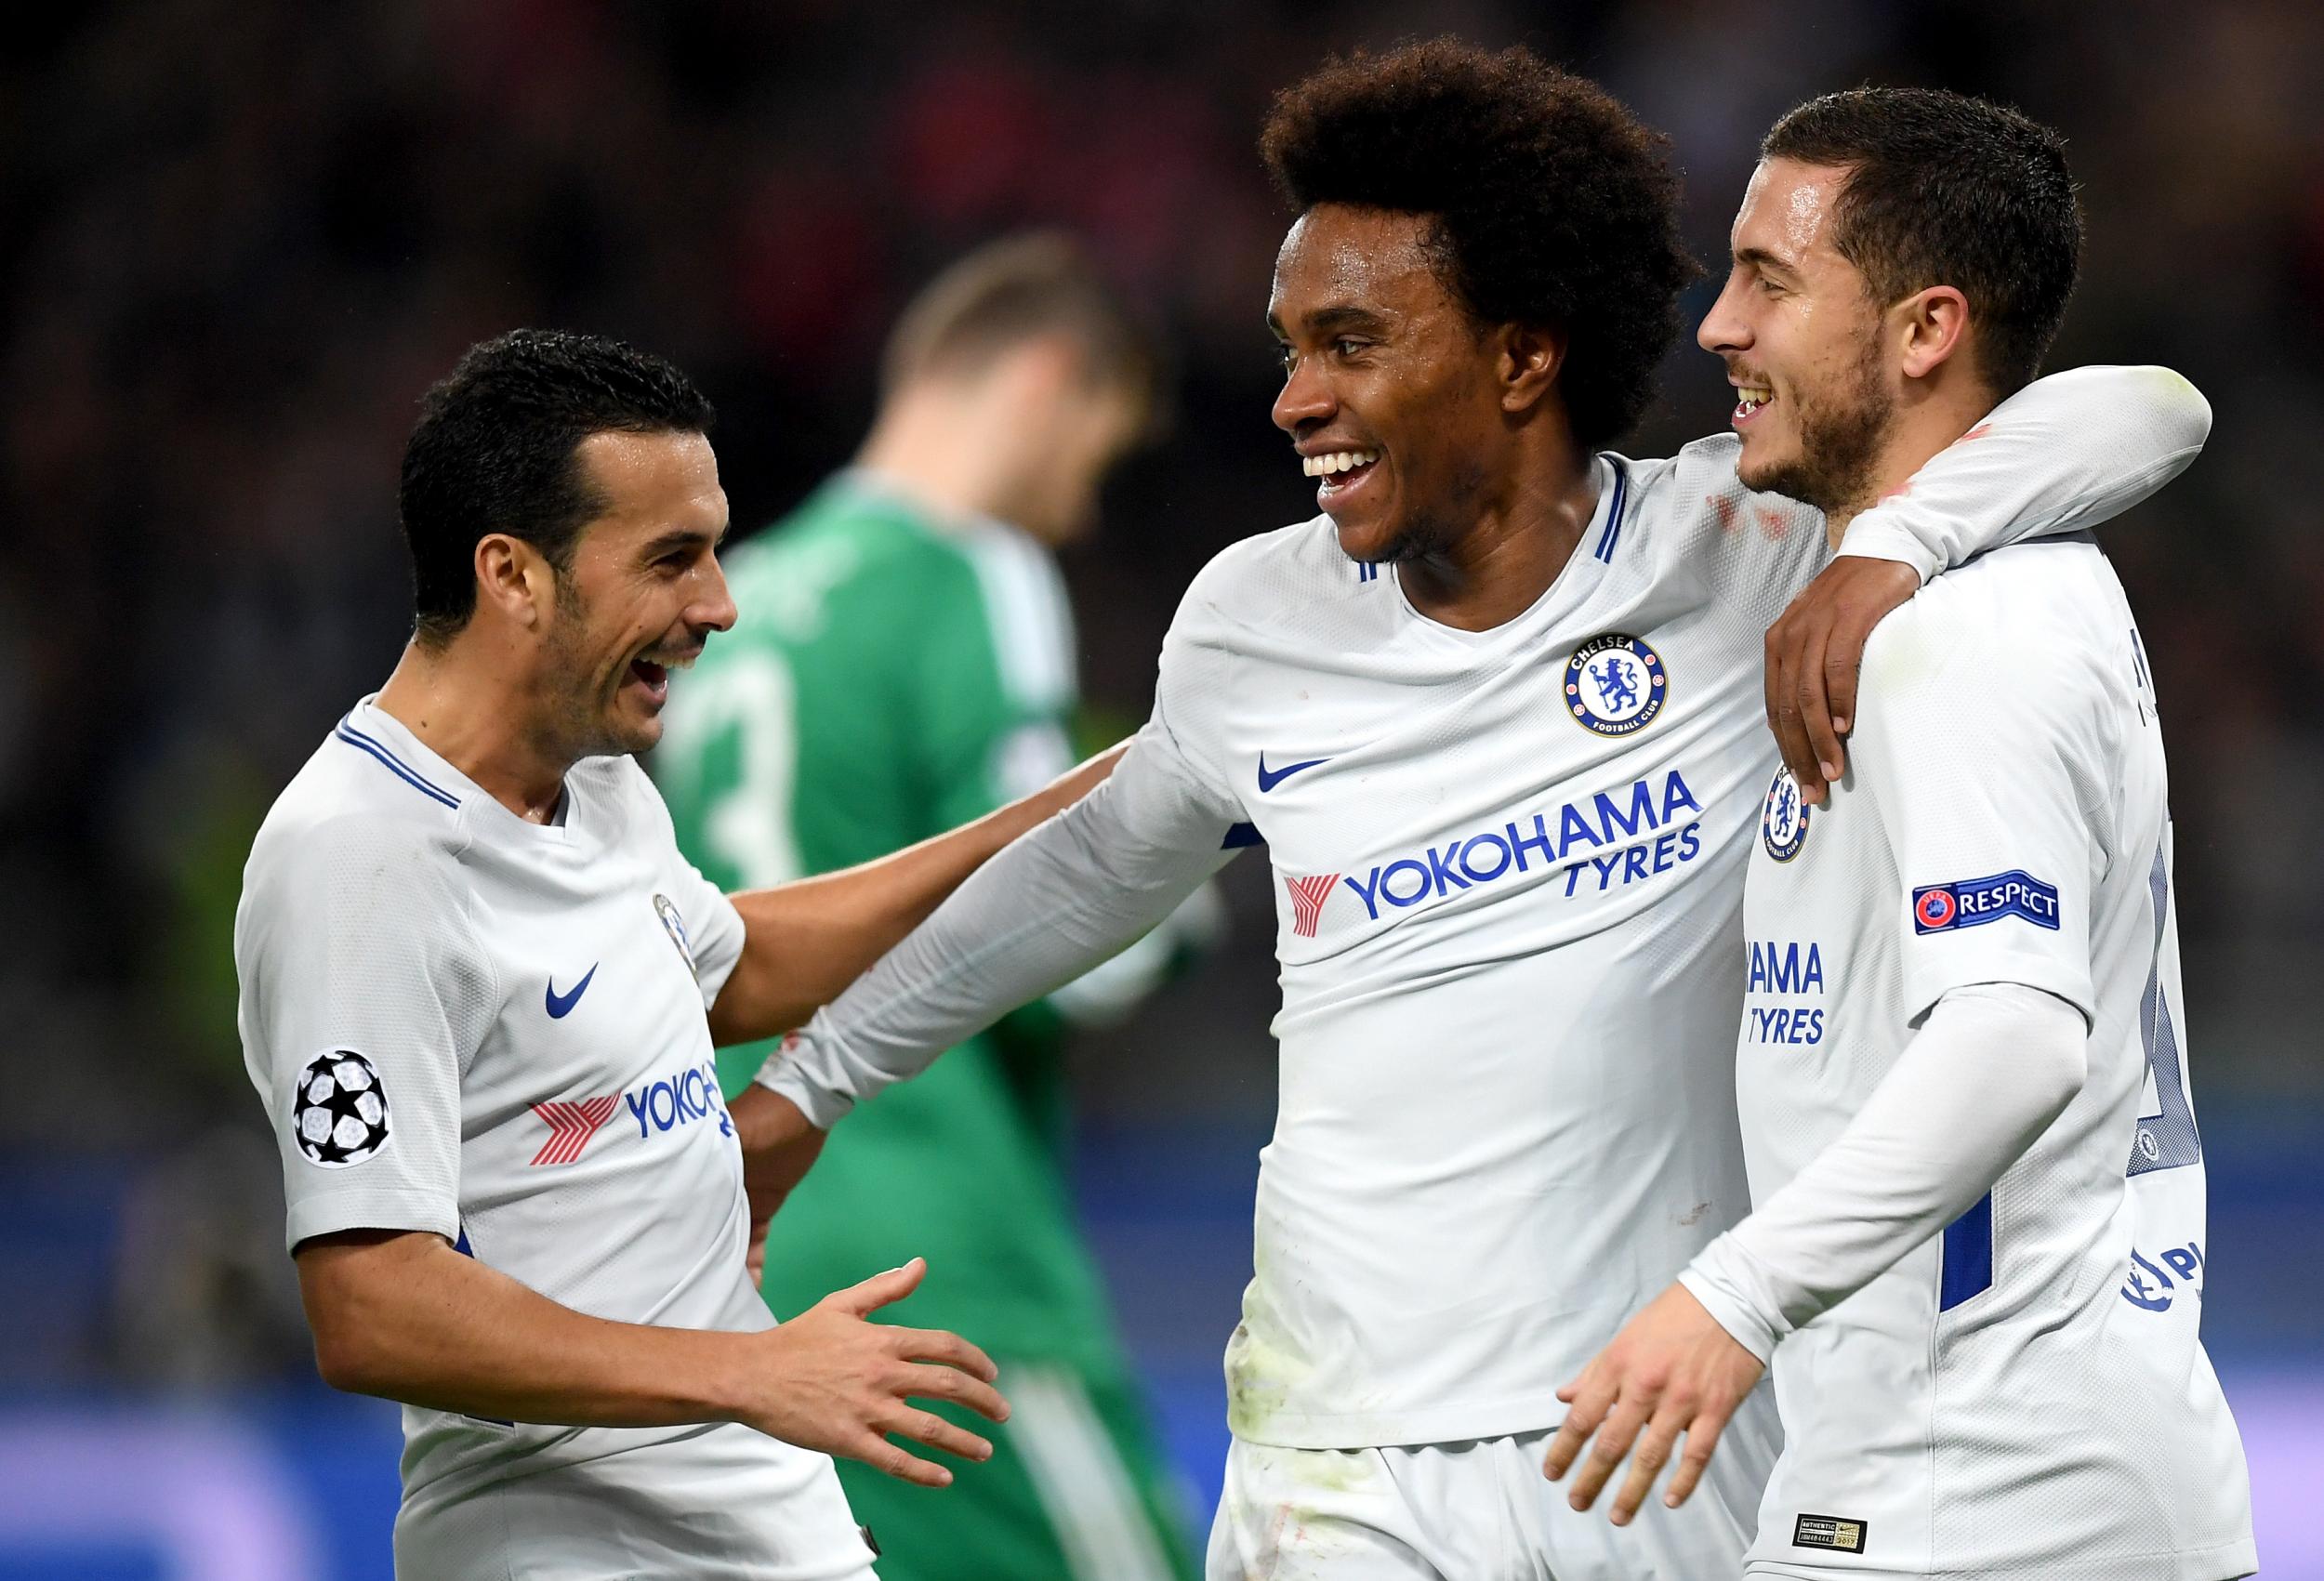 &#13;
Willian insisted he was fouled for the first-half penalty &#13;